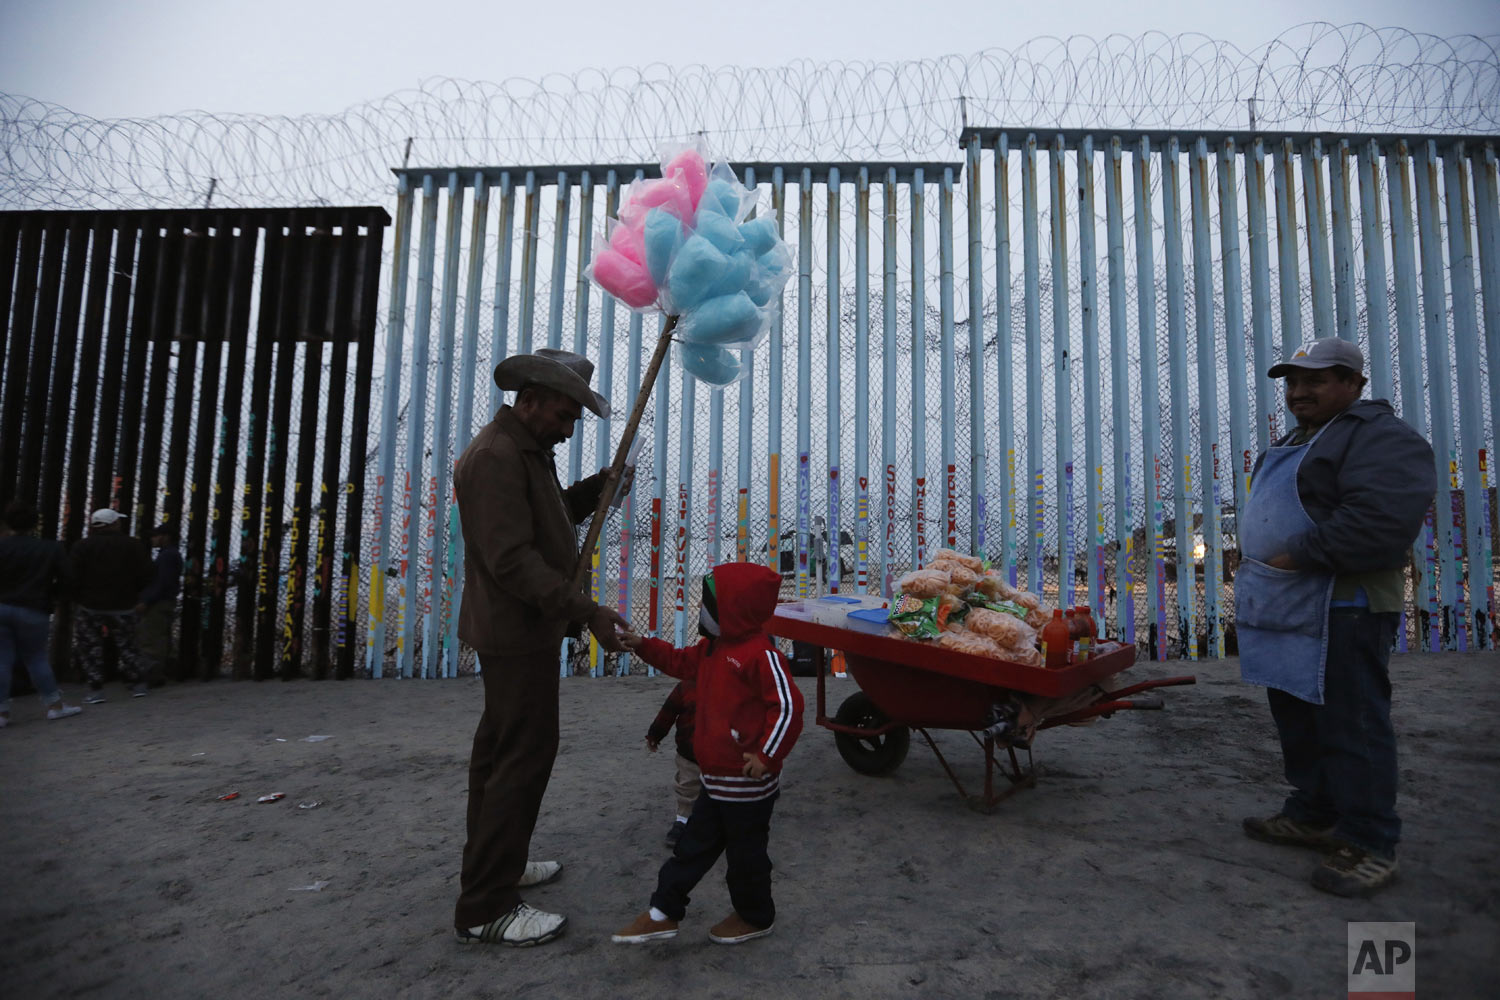  A Honduran migrant boy tries to buy cotton candy from a vendor, but doesn't have enough money, as migrants visit the U.S. border wall to look for opportunities to cross, at the beach in Tijuana, Mexico, on Sunday, Dec. 9, 2018. Discouraged by the lo